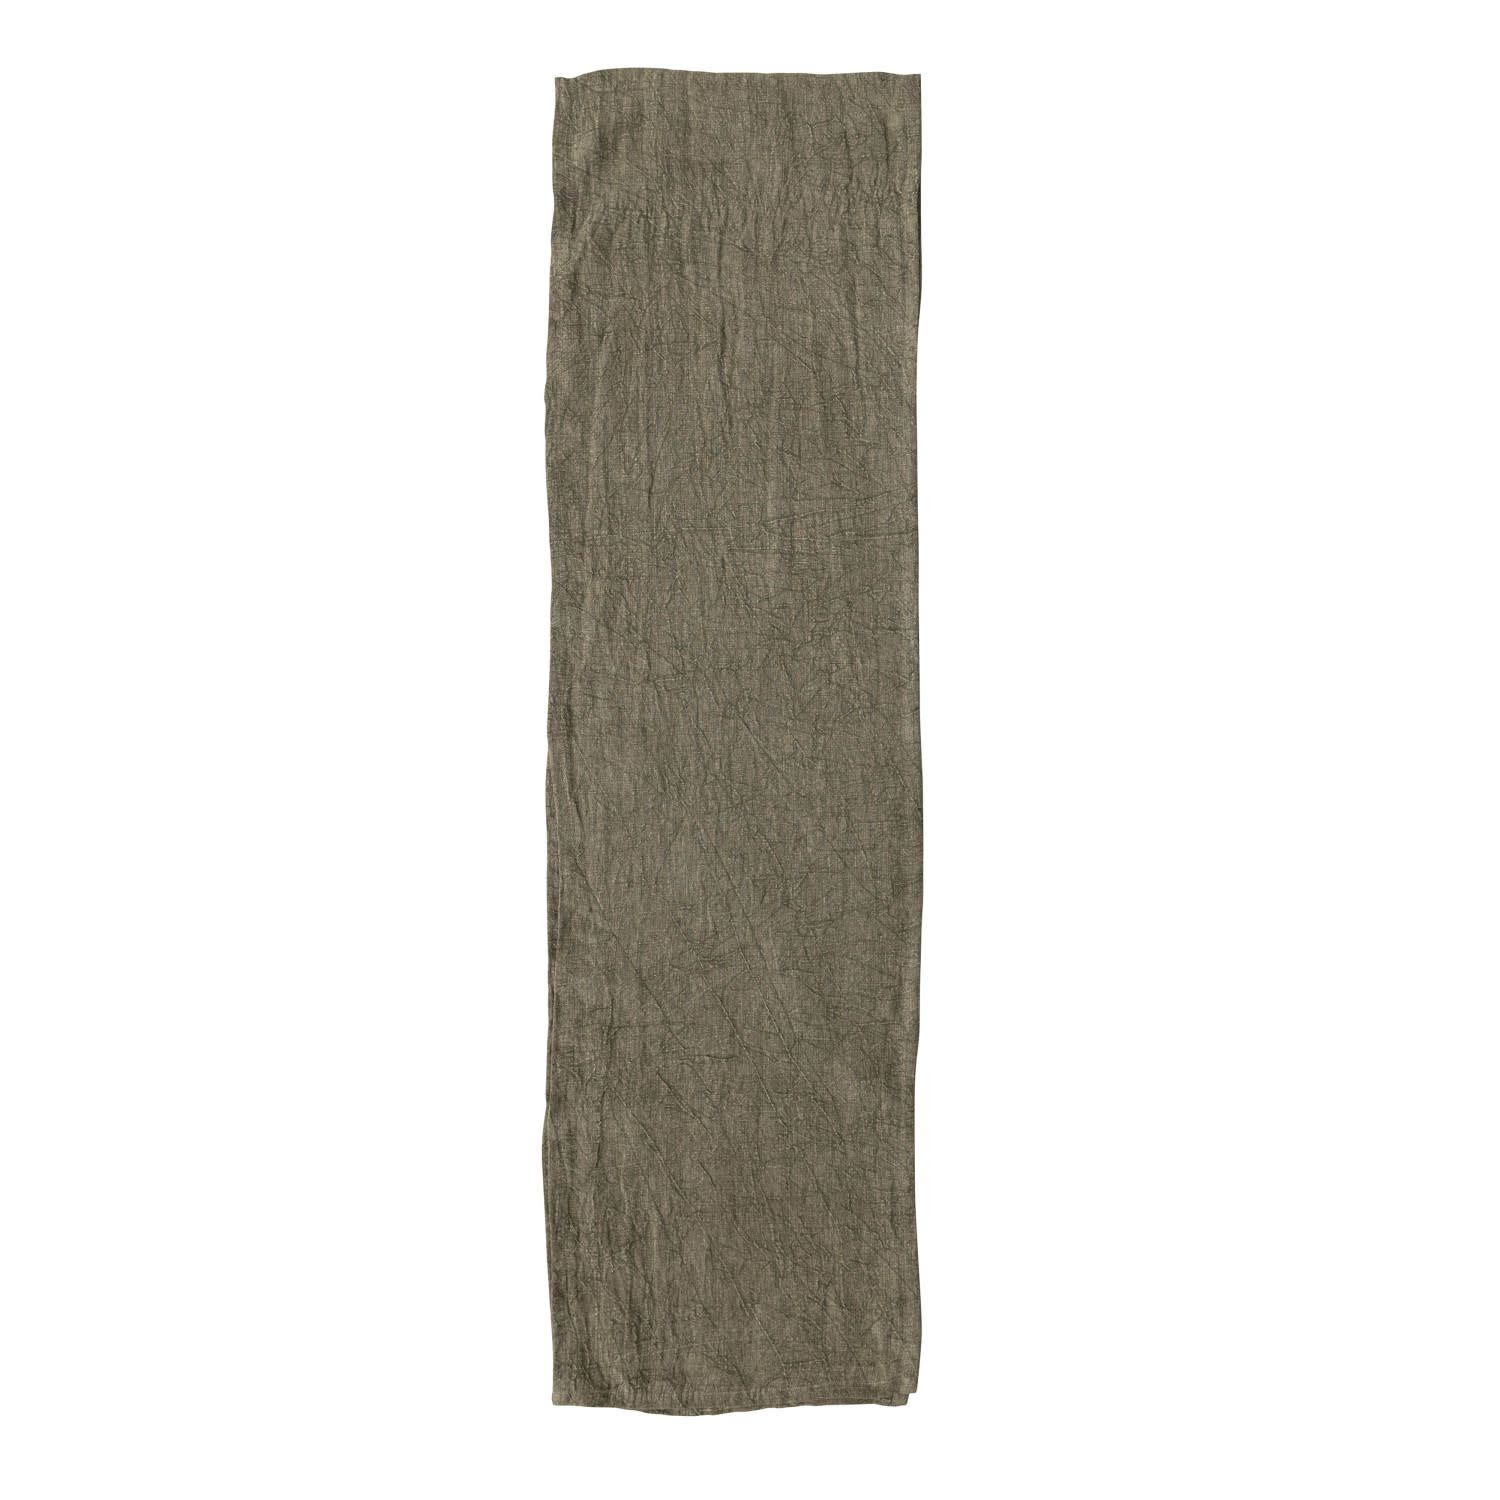 Stonewashed Linen Table Runner, Olive, 108"